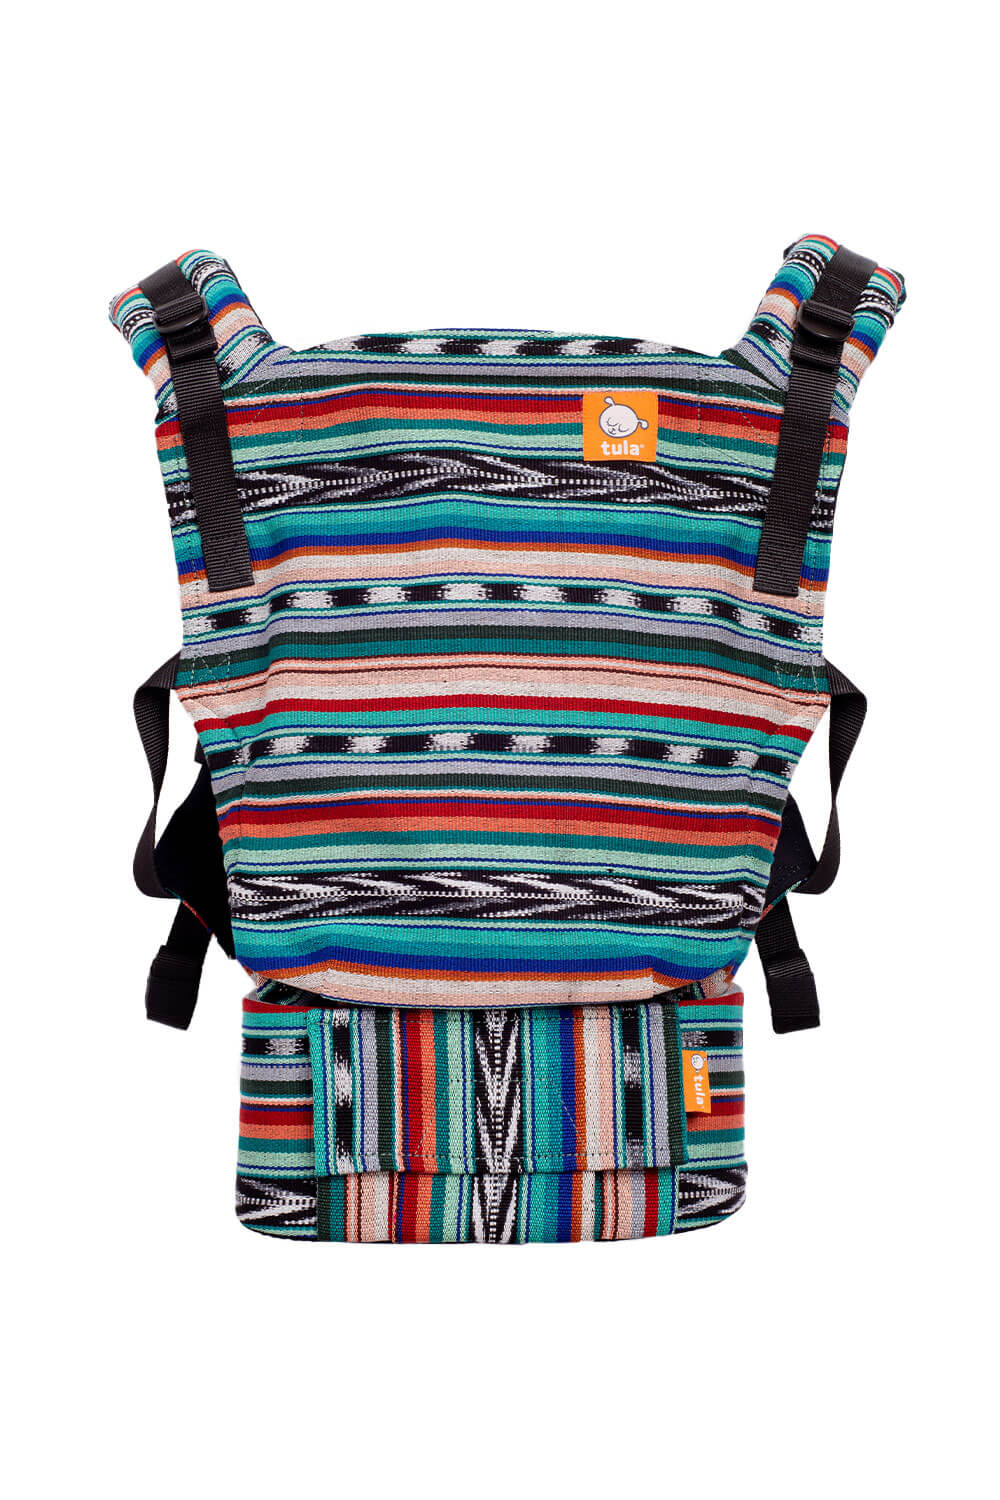 Blue Lagoon - Signature Woven Free-to-Grow Baby Carrier